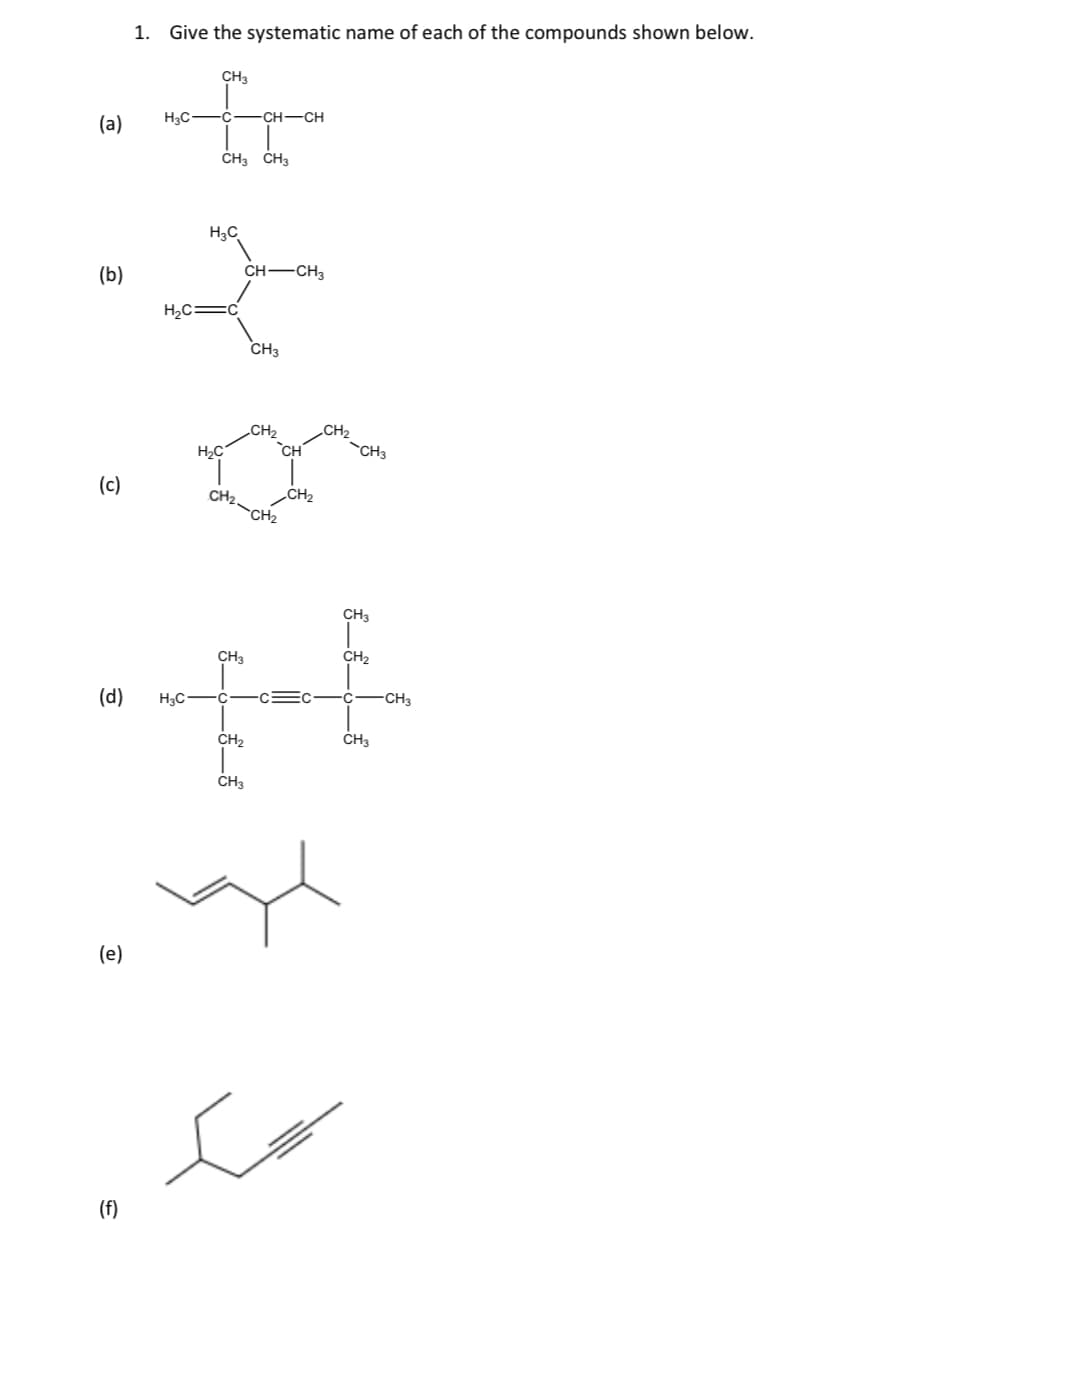 1. Give the systematic name of each of the compounds shown below.
CH3
H3C -C
-CH-CH
(a)
ČH3 CH3
H3C
CH -CH3
(b)
H2C=c
CH3
CH2
CH2
H2C
CH'
CH3
(c)
CH2-
CH2
CH2
CH3
CH3
CH2
(d)
H3C-
-c=c
C-CH3
CH2
CH3
CH3
(e)
(f)
